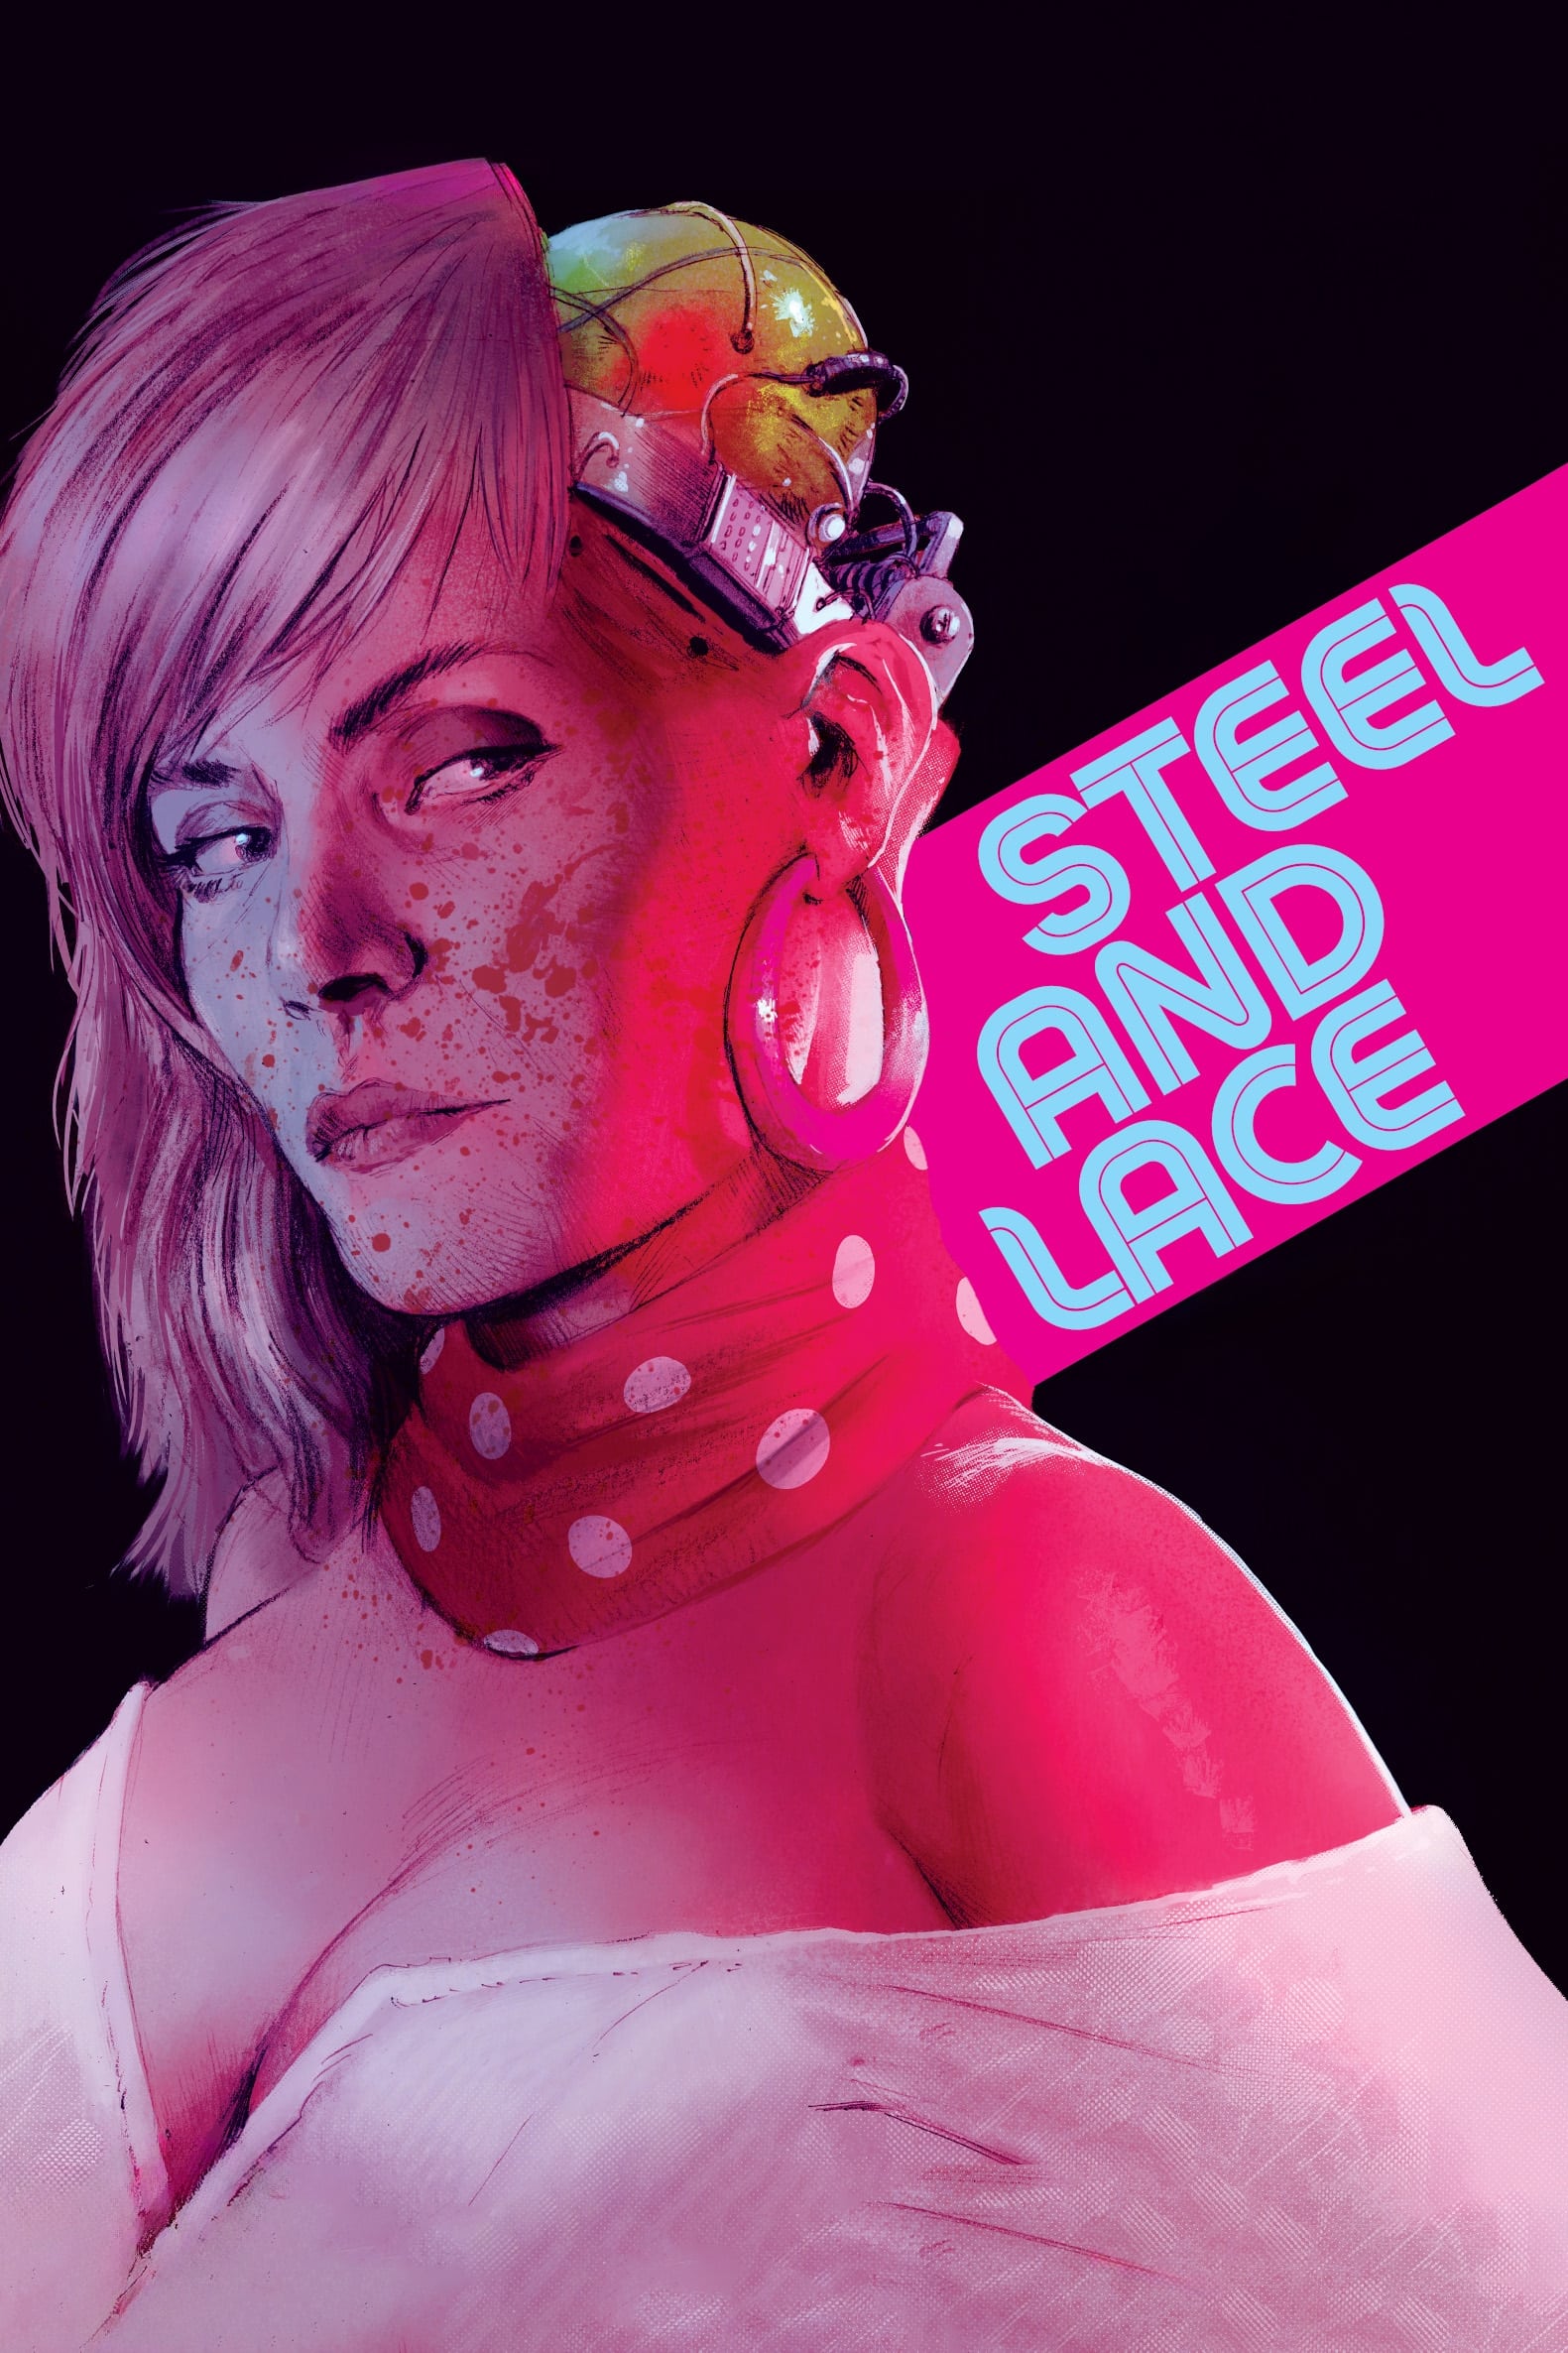 Steel and Lace (1991)